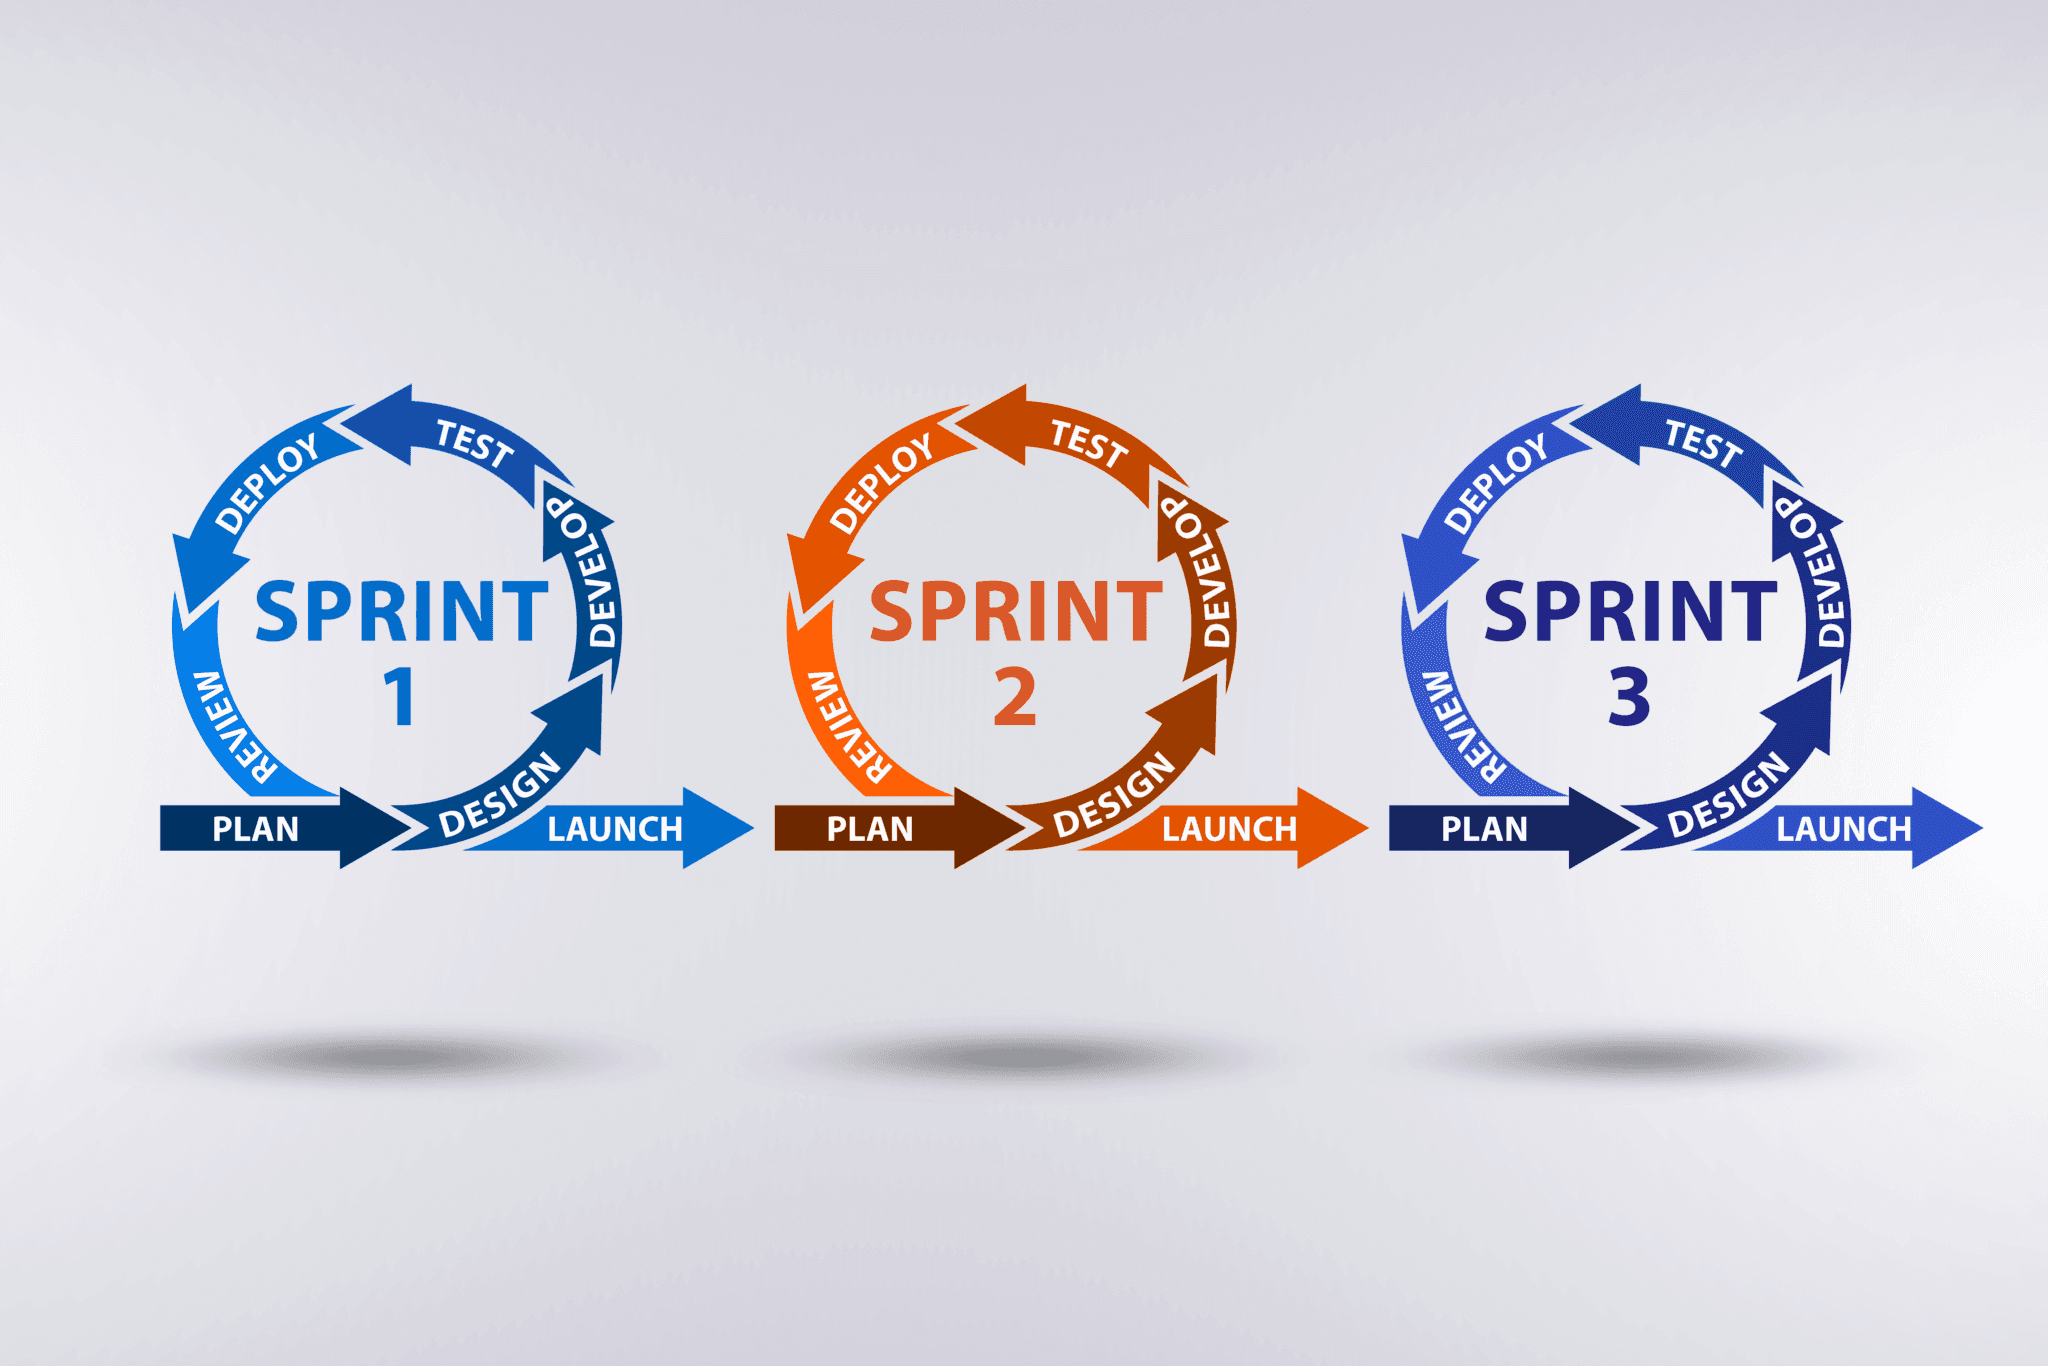 illustration of adaptive project life cycle: three 'sprints' which include the following steps: plan, design, develop, test, deploy, review, launch. Each sprint's 'launch' goes to the next sprint, ending at sprint 3.